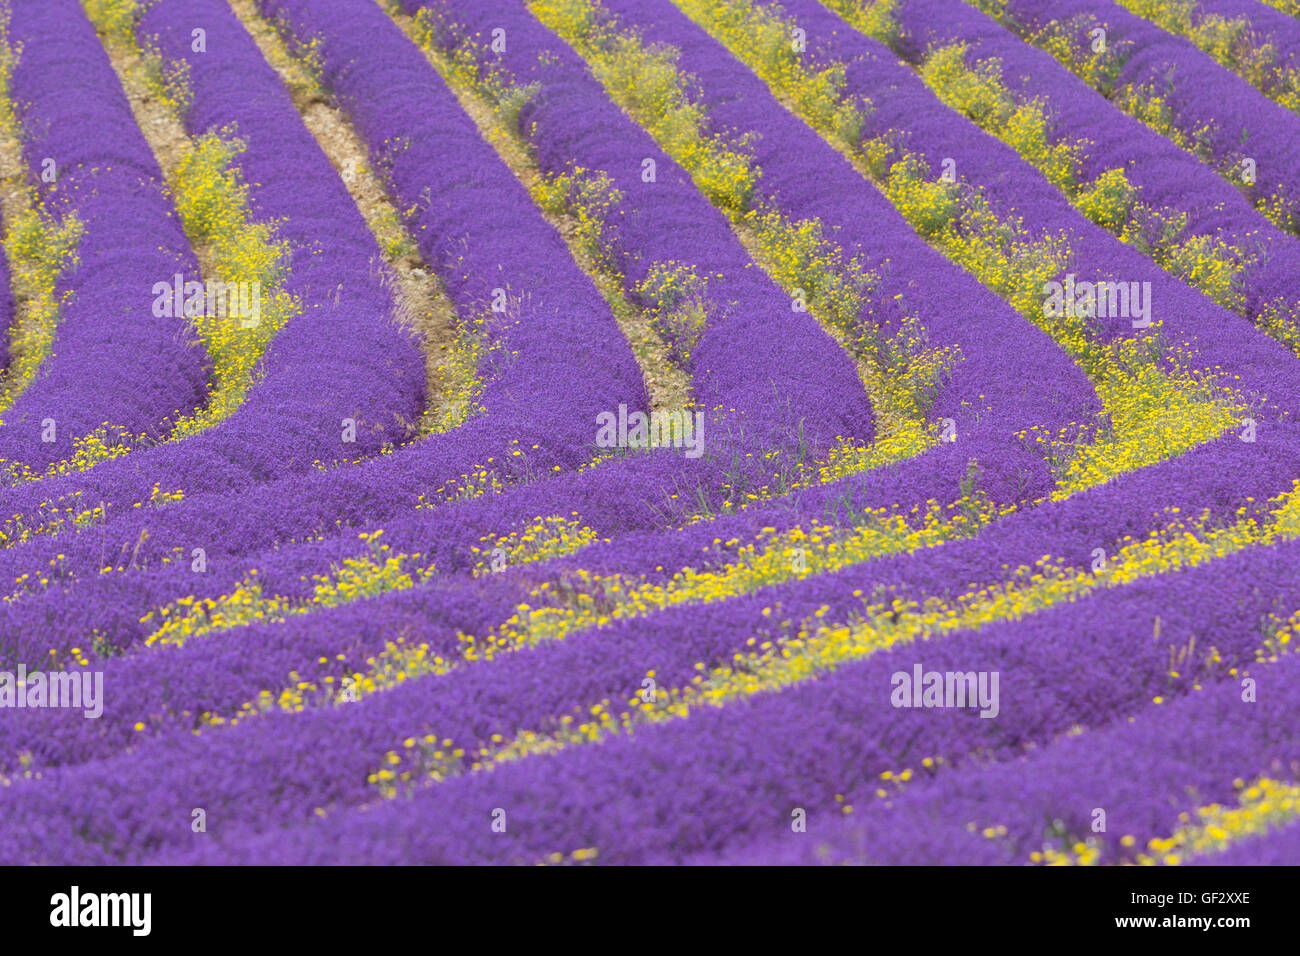 Beautiful landscape of blooming lavender field in Provence, France, Europe. Stock Photo